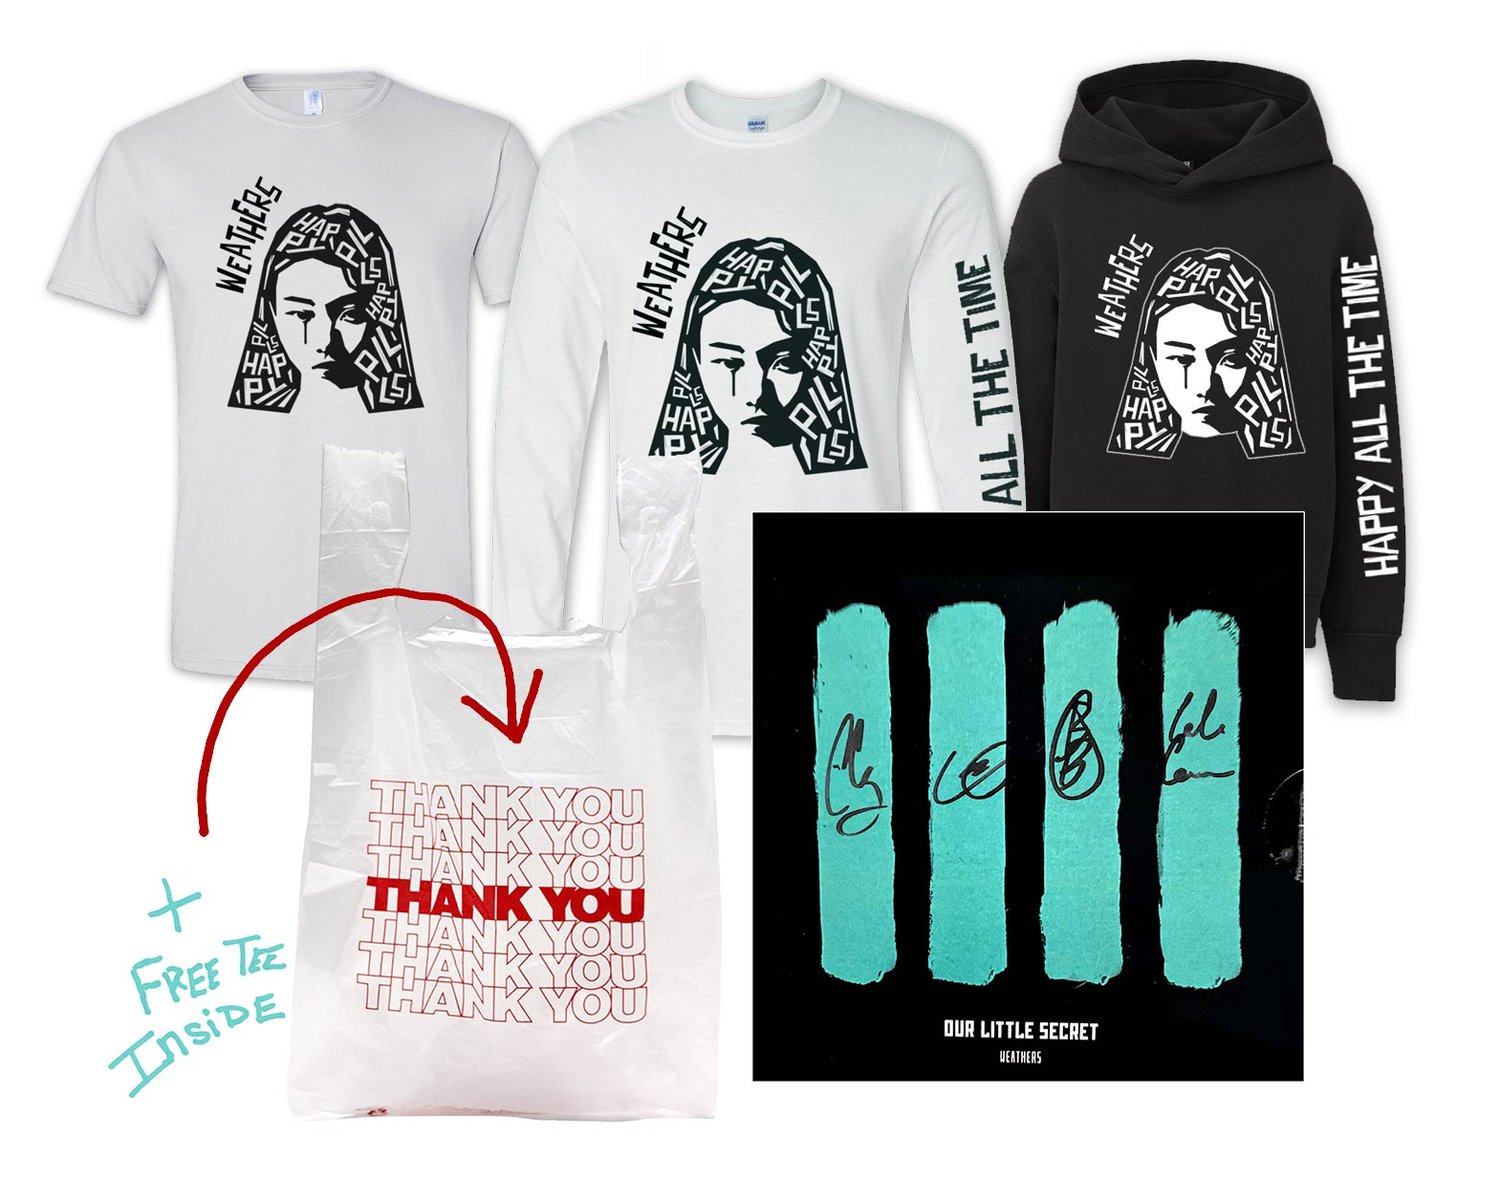 Image of "Happy Pills" BUNDLE #1 + Free SS Tee Inside "Thank You" Bag - - - Mix Any Sizes (No XXL's)